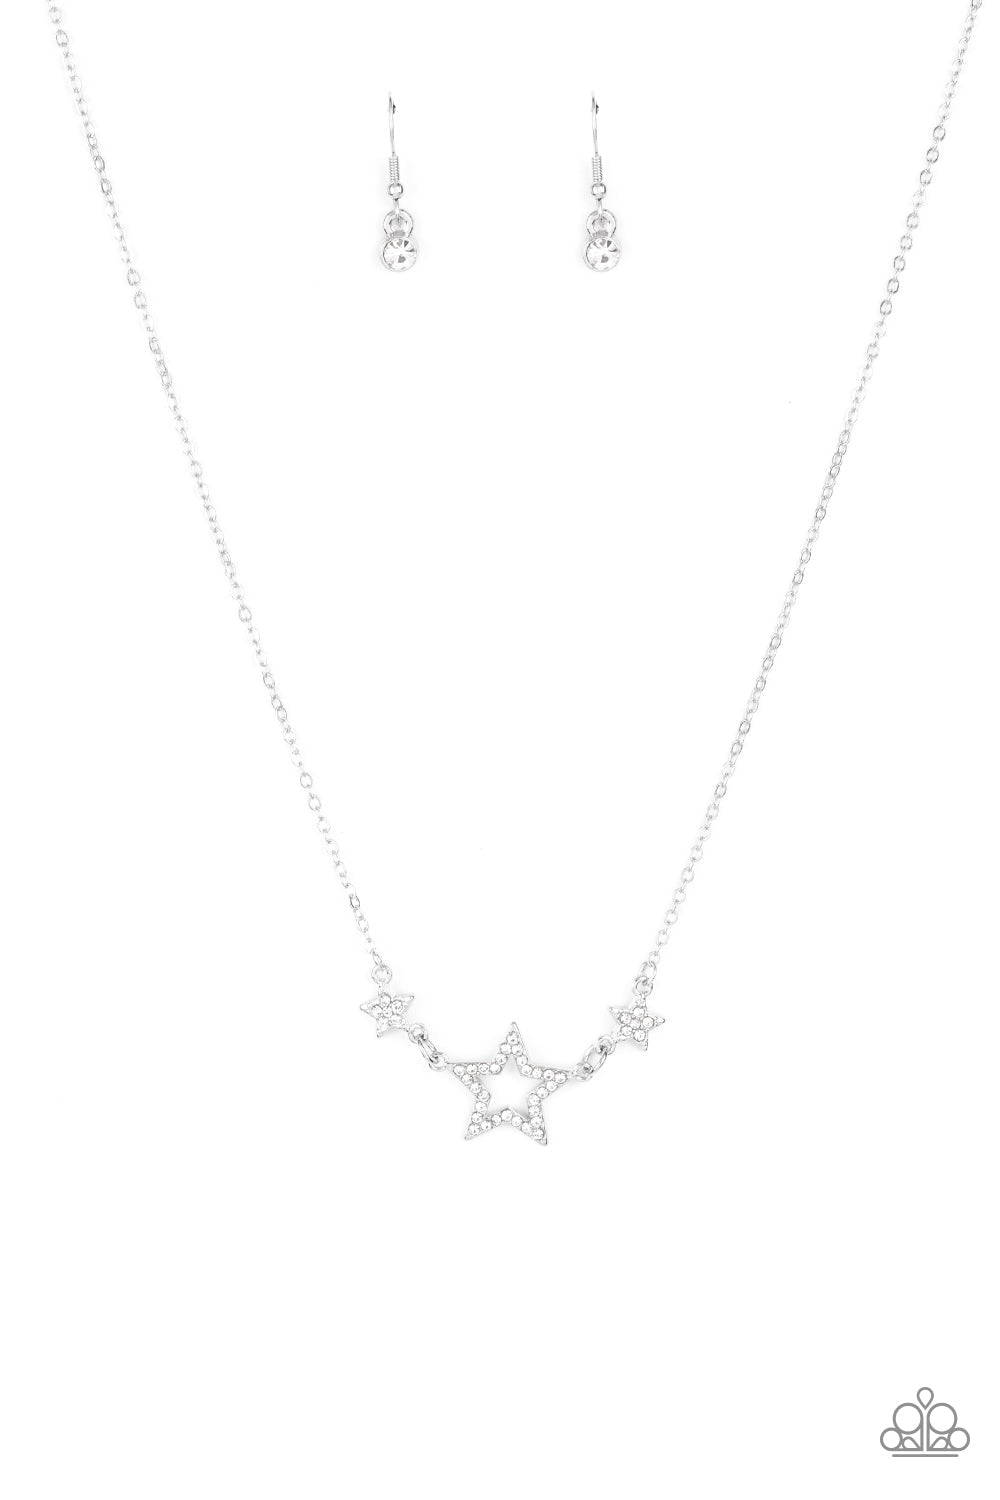 United We Sparkle - Silver Patriotic Star Silver Necklace - Paparazzi Accessories - A white rhinestone silver star is flanked by two dainty white rhinestone encrusted silver stars, creating a sparkly patriotic pendant below the collar fashion necklace.